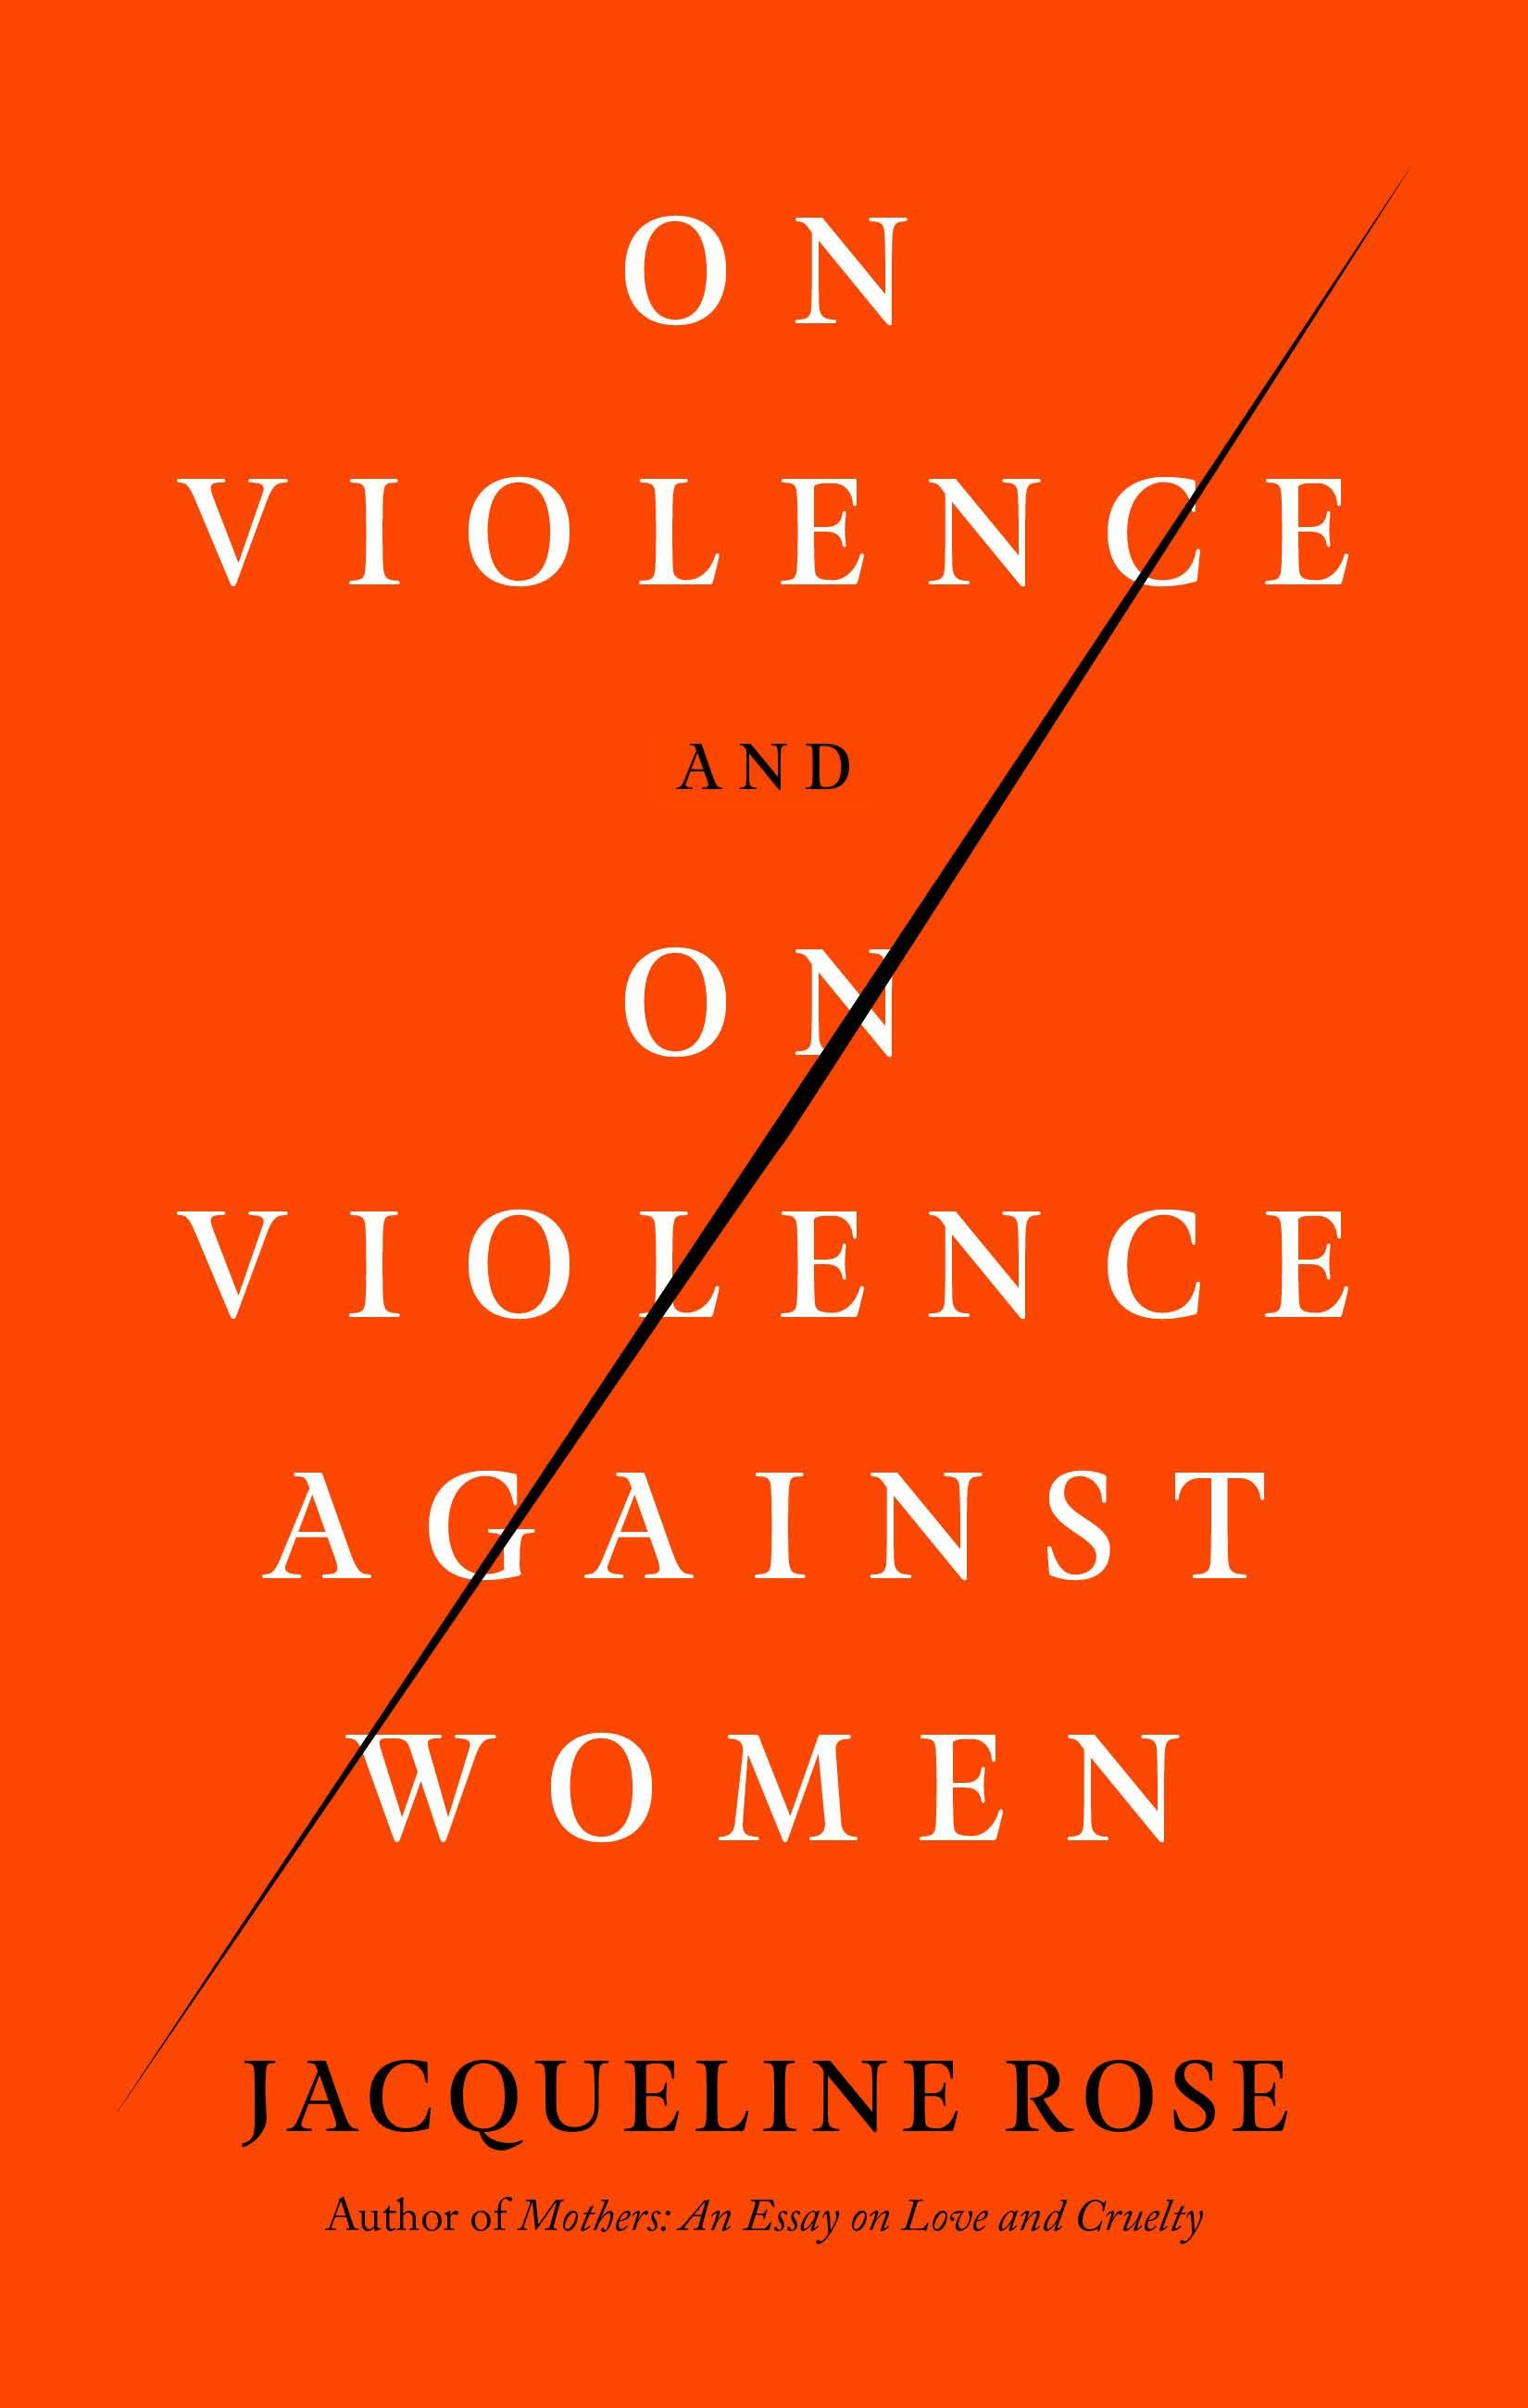 Innocent Barely Legal - On Violence and On Violence Against Women